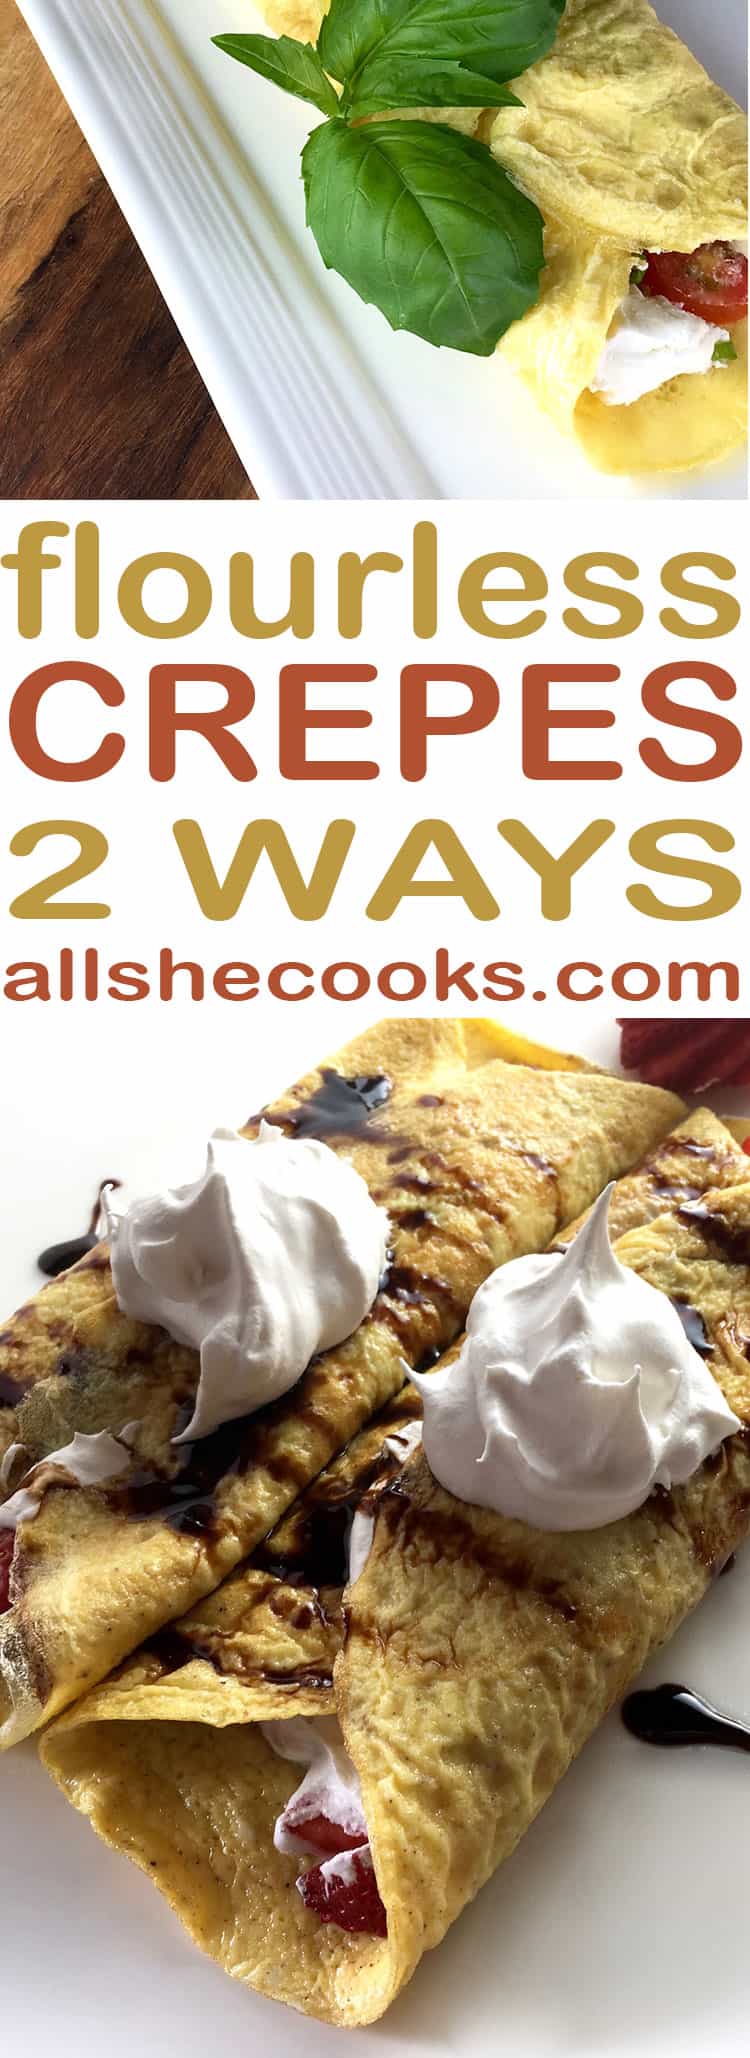 Enjoy these Flourless Crepes two ways. We have both a Savory Crepe recipe and a Sweet Crepes recipe that we know you will love. 